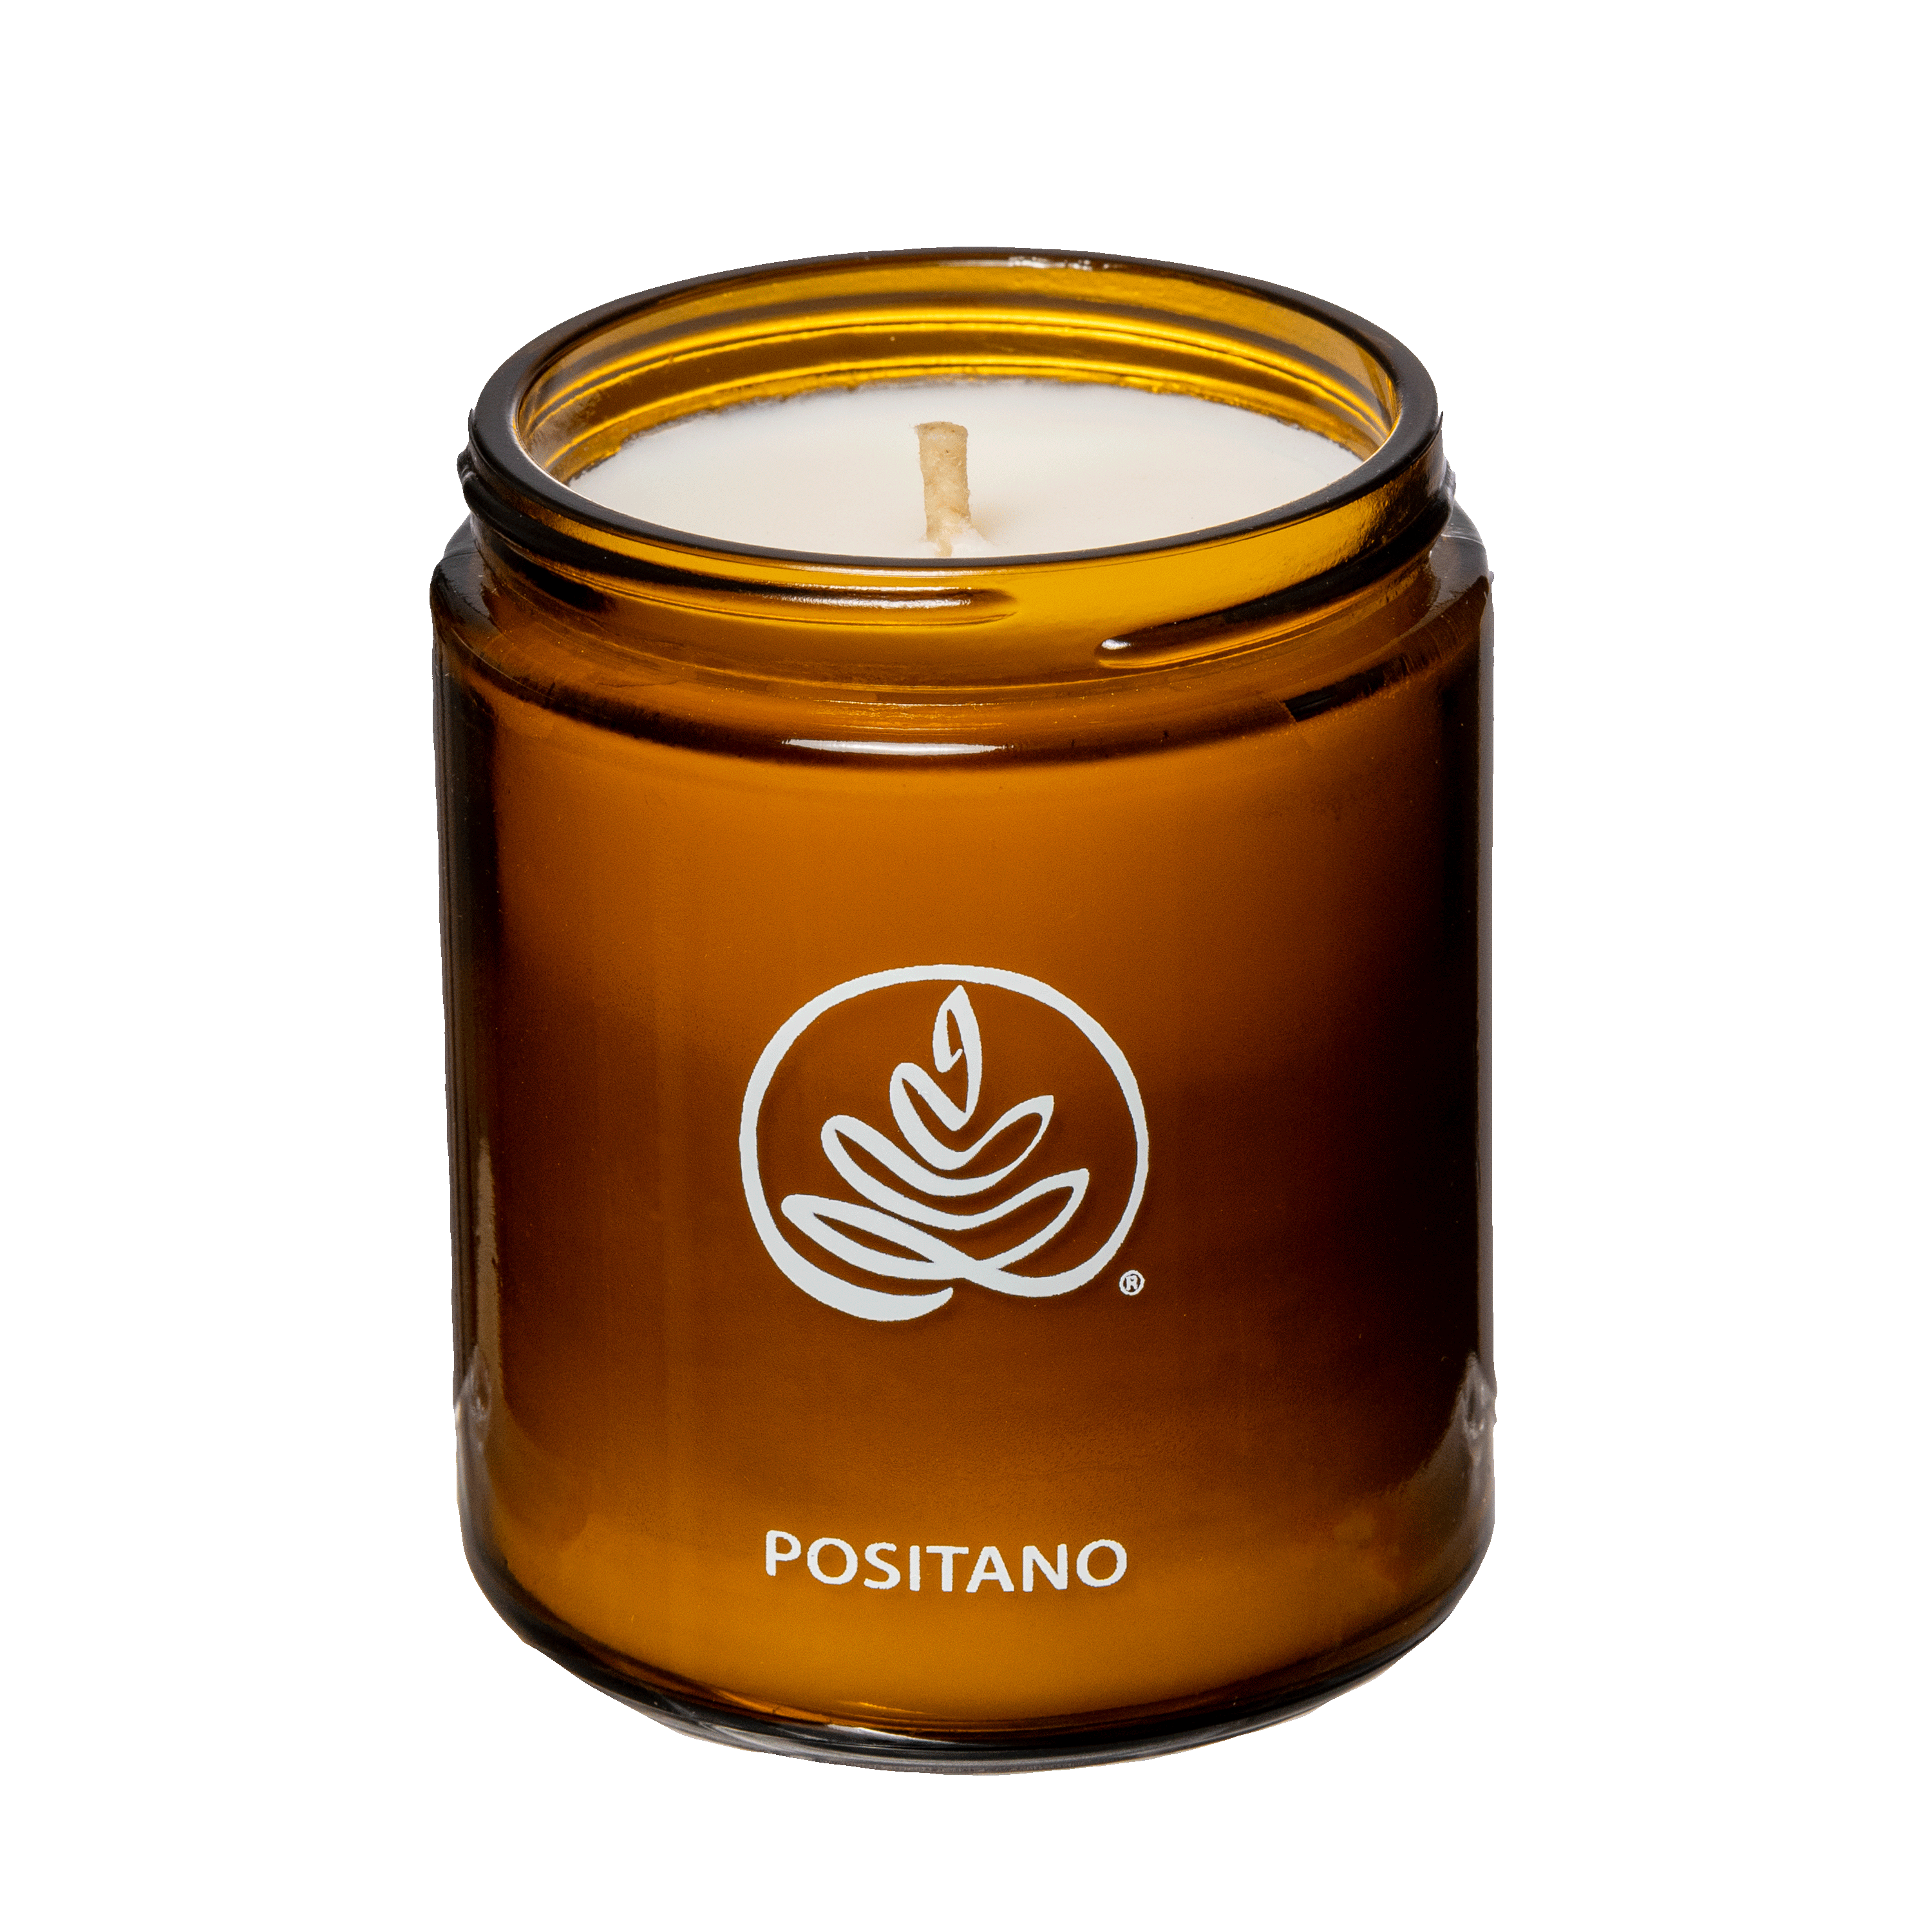 Positano Scented Candle